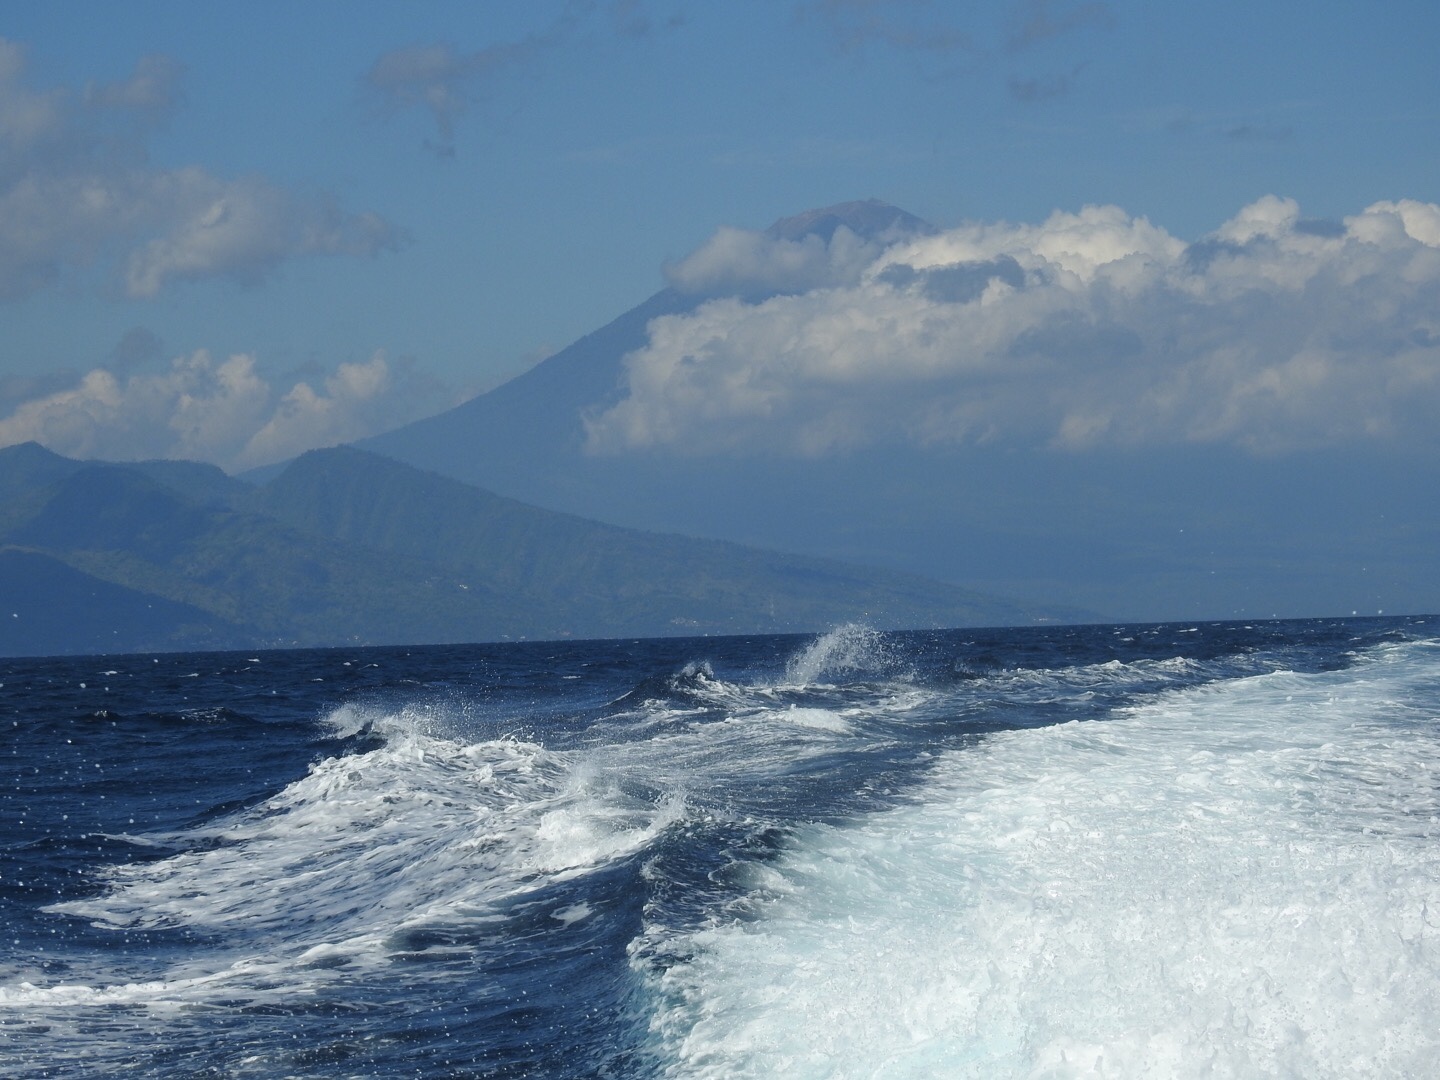 Fast Boat Ferry from Amed to Gili Islands​